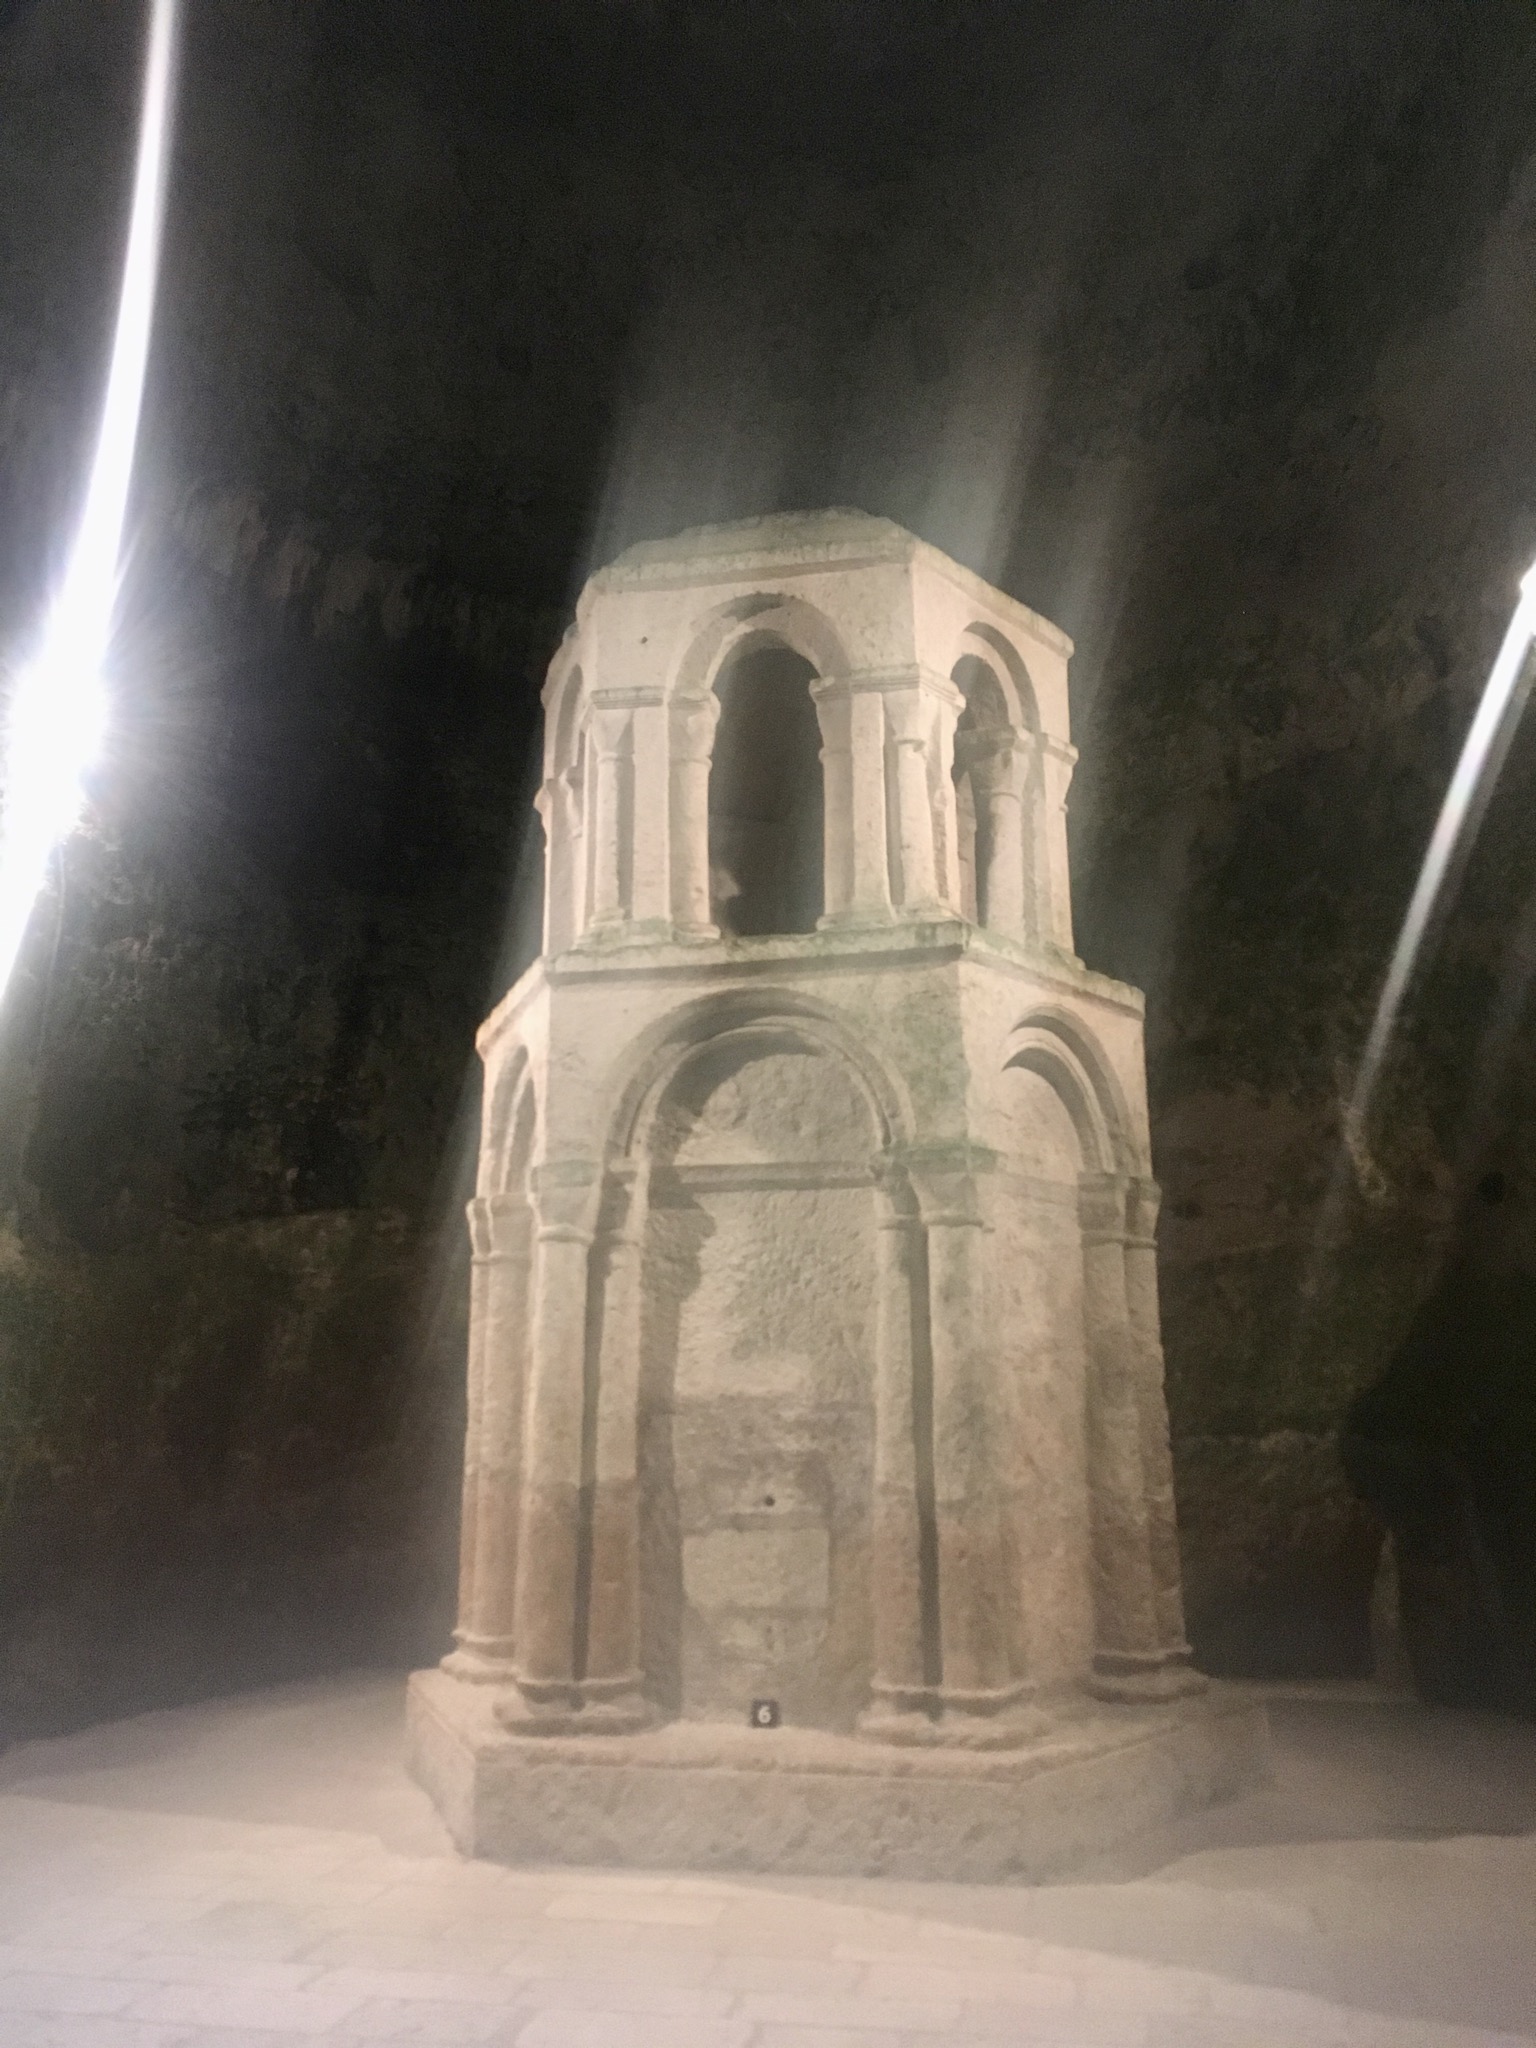 Underground Church of St Jean, Aubeterre-Sur-Dronne. Also known as the Monolithic church, Eglise Monolithique, or the troglodyte church